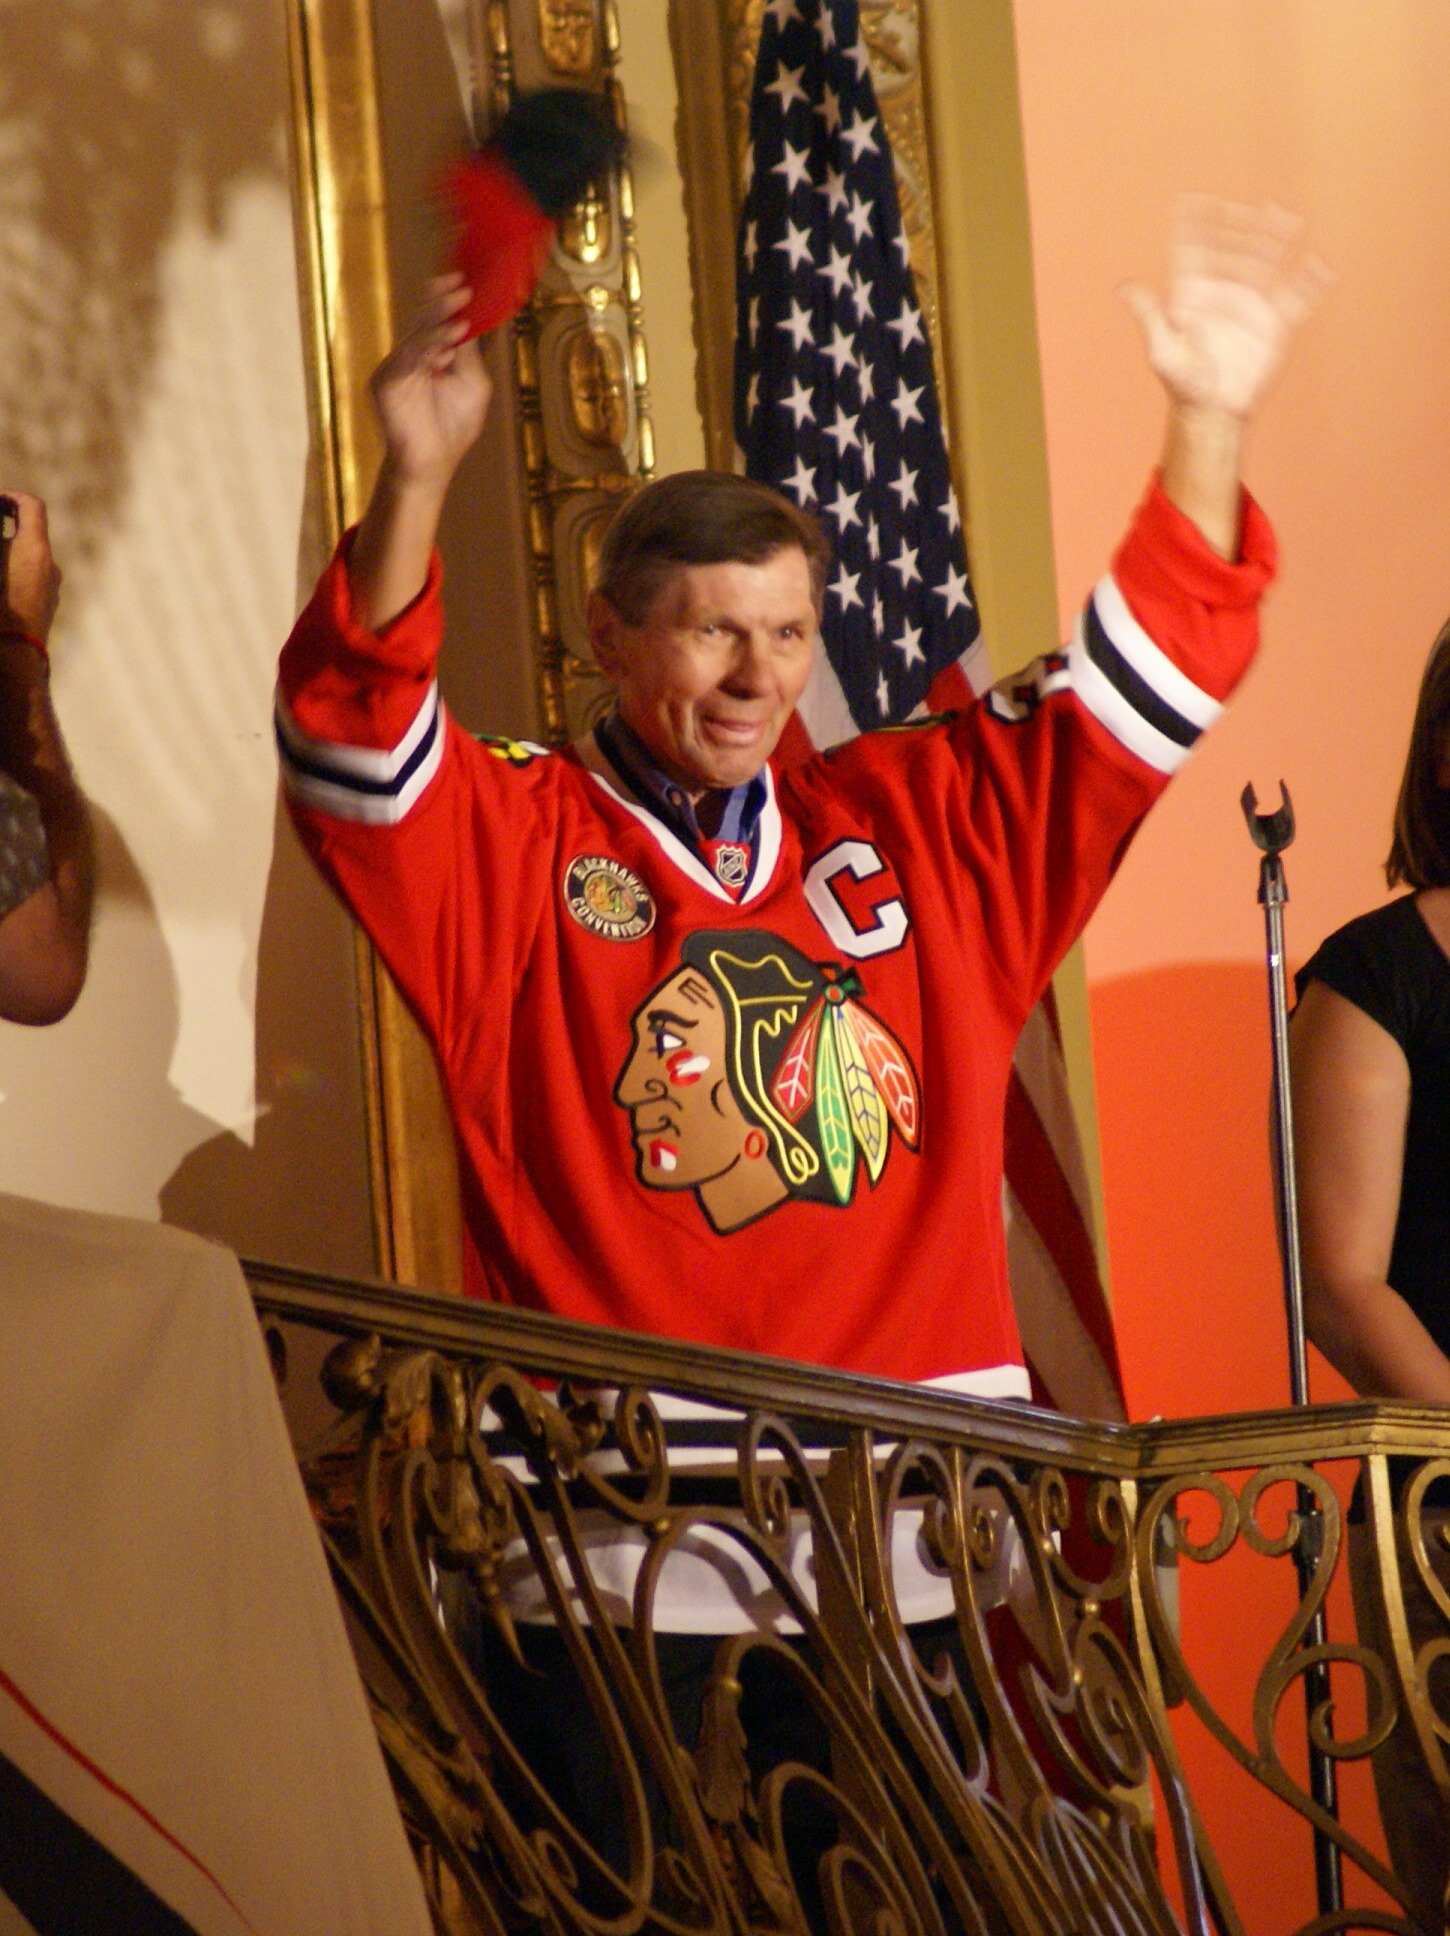 Stan Mikita, who led Blackhawks to 1961 title, dies at 78